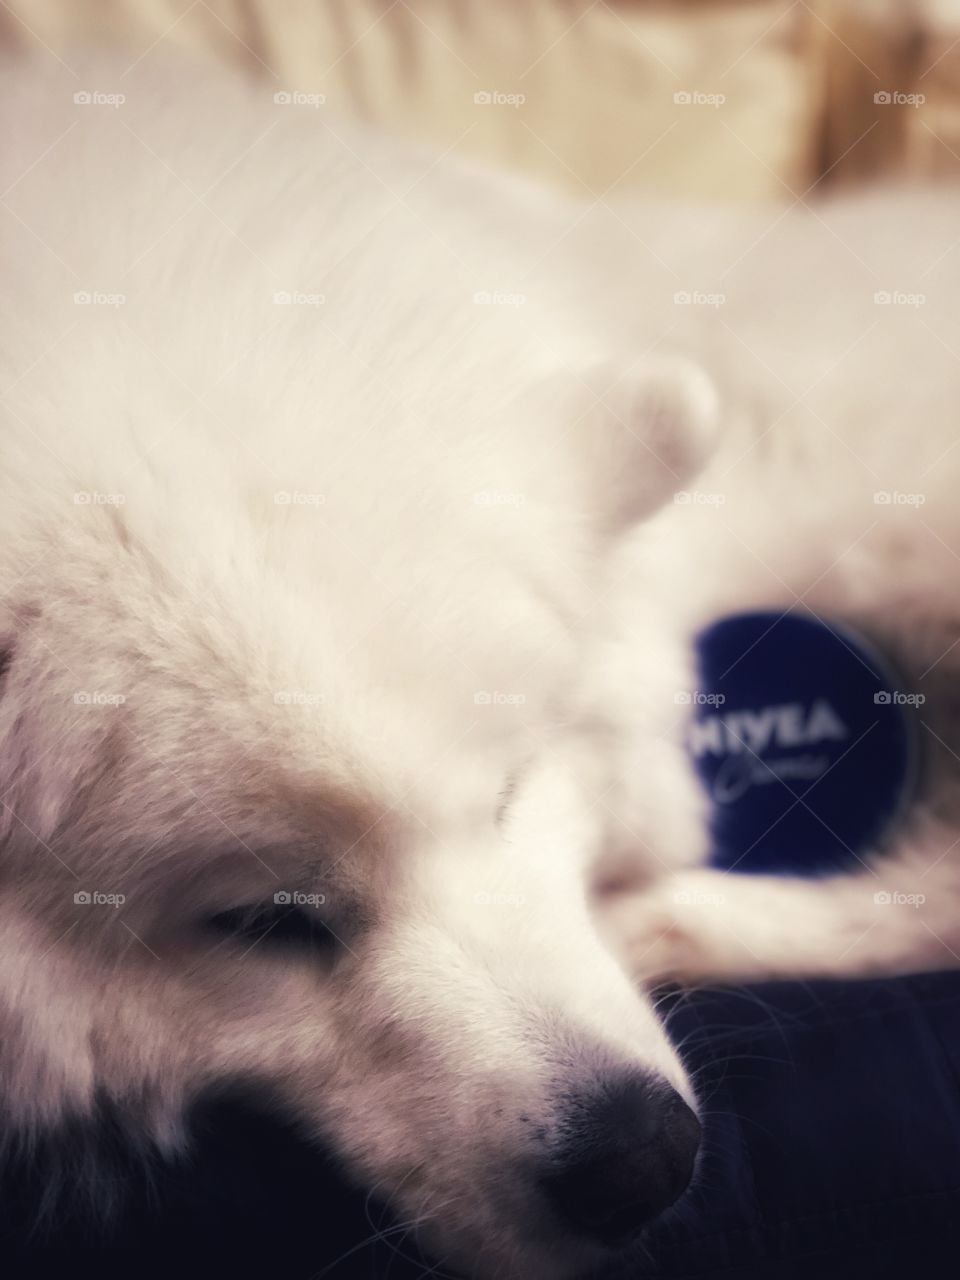 Nivea - to protect the most valuable in your life. And you can sleep calmly.